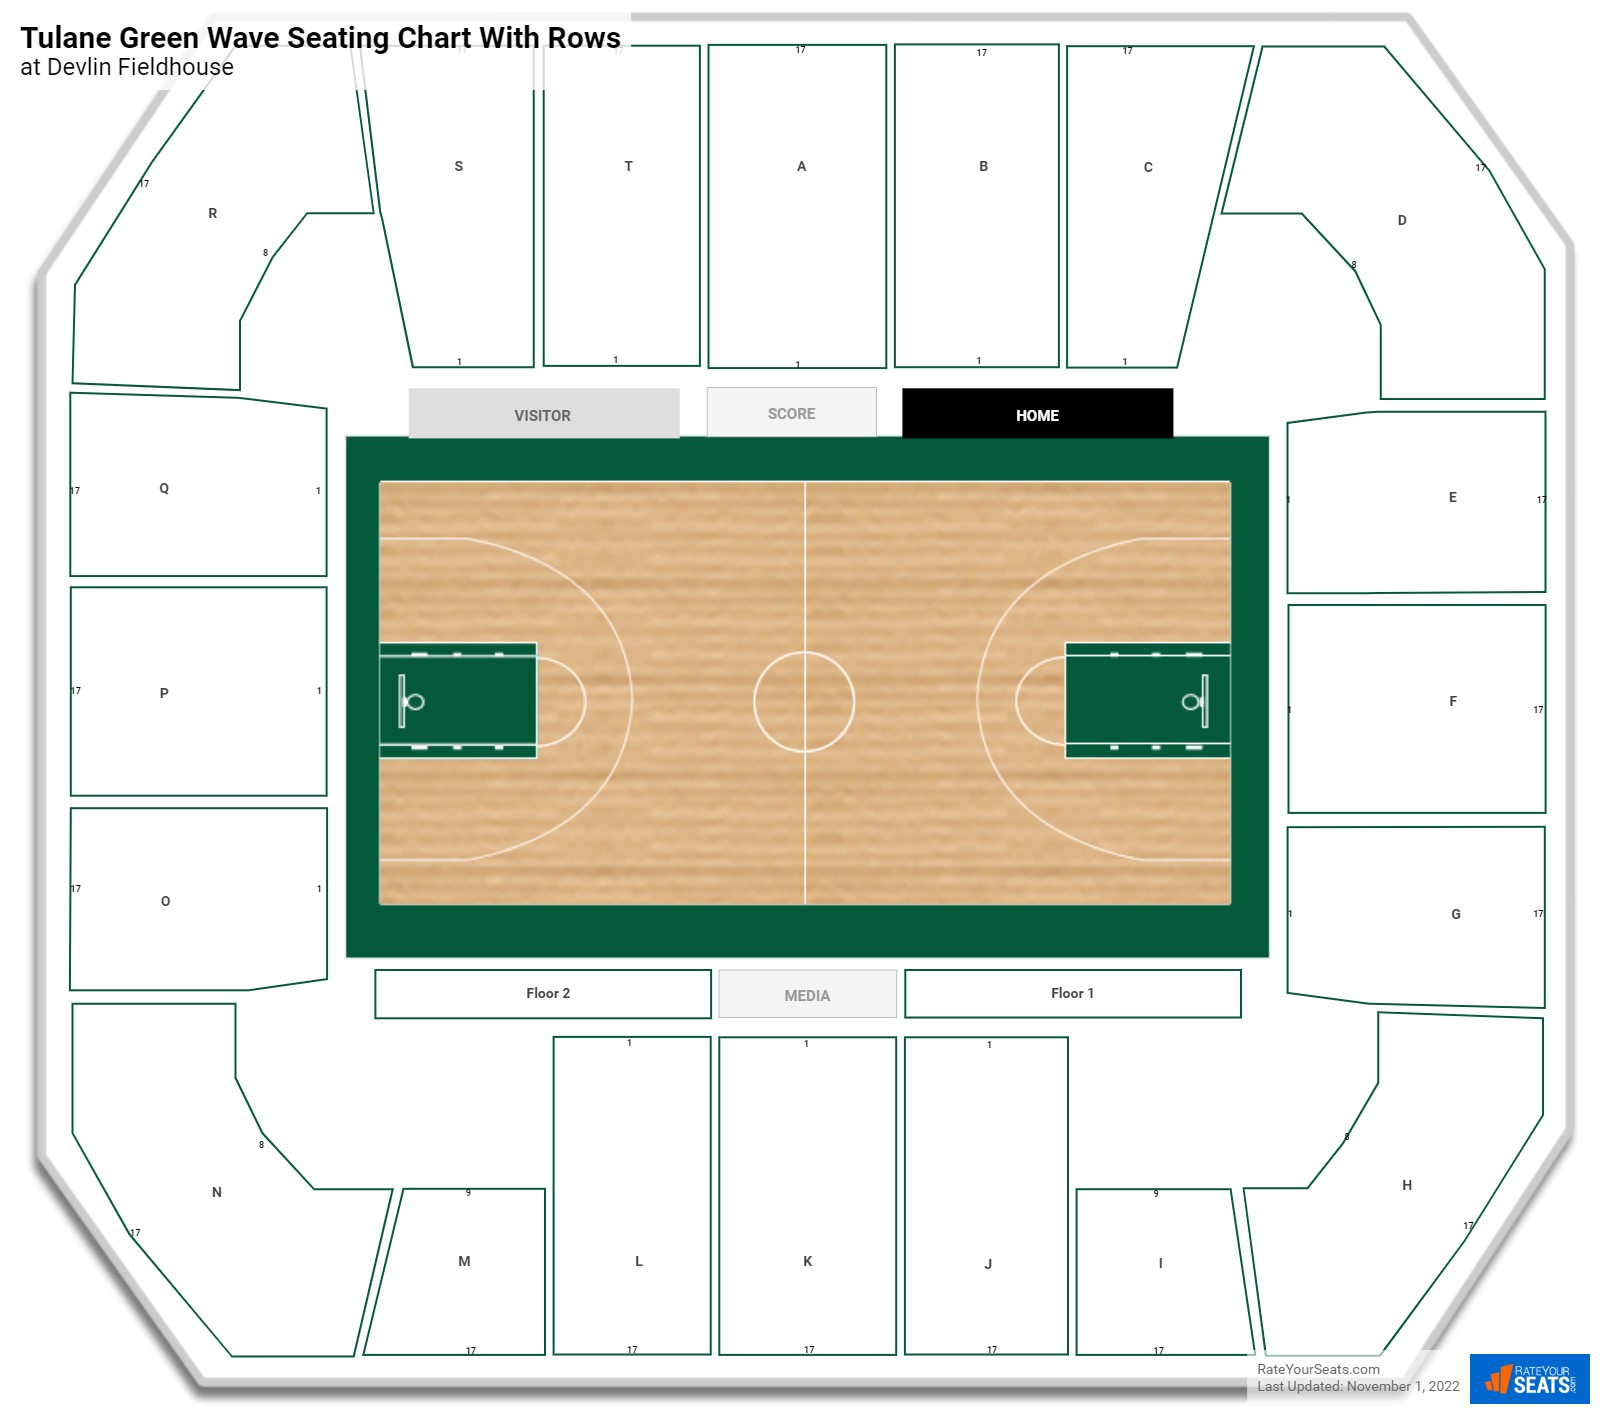 Devlin Fieldhouse seating chart with row numbers